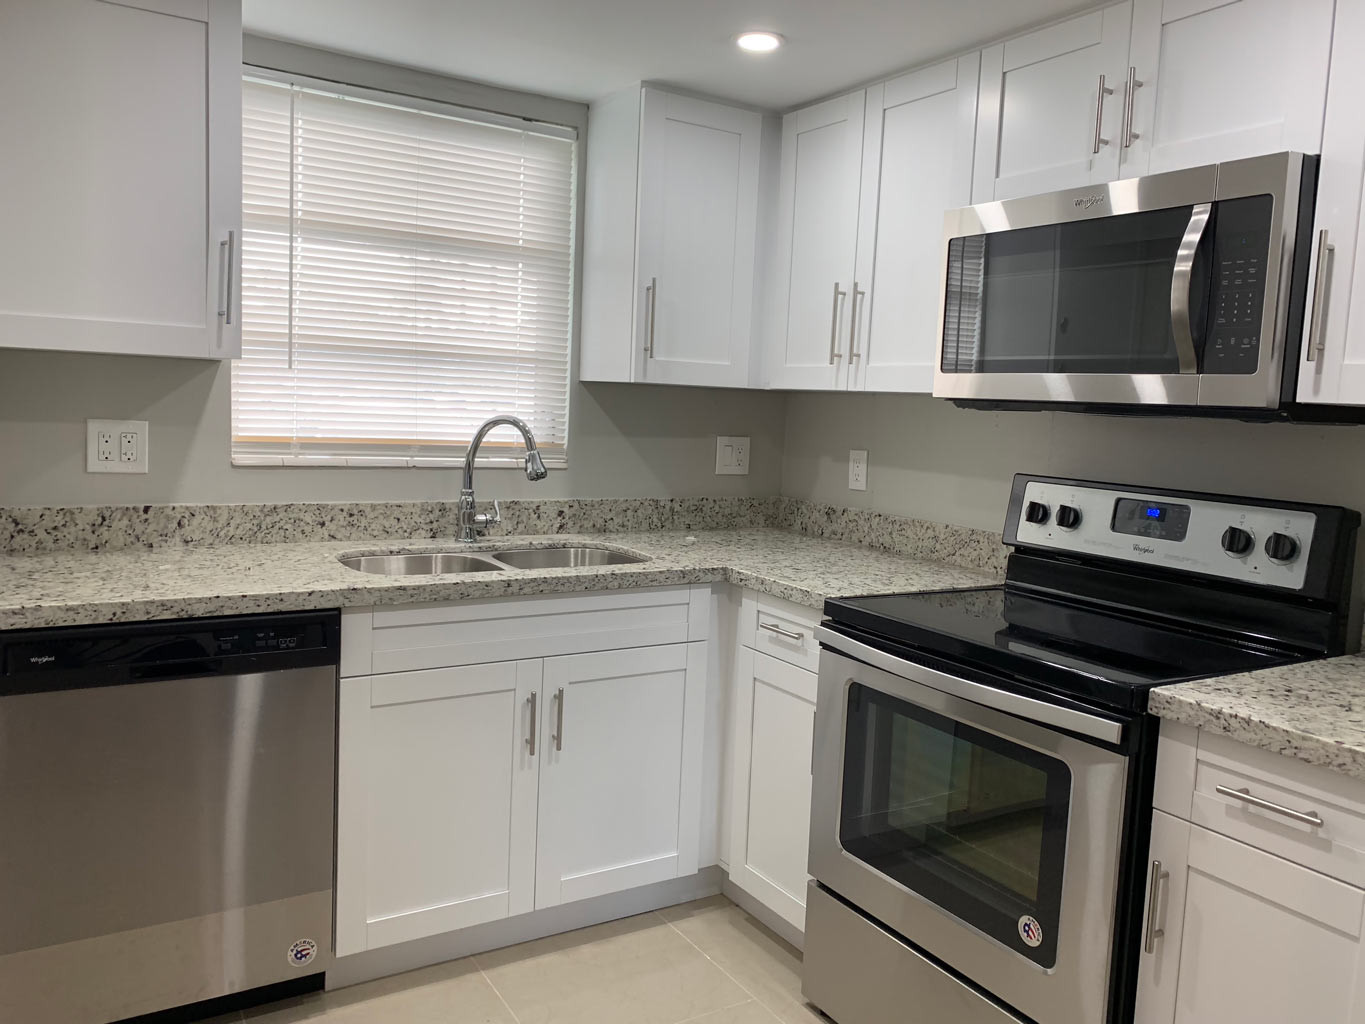 Remodel A Small Kitchen
 Small Kitchen Remodel with White Shaker Cabinets — Miami